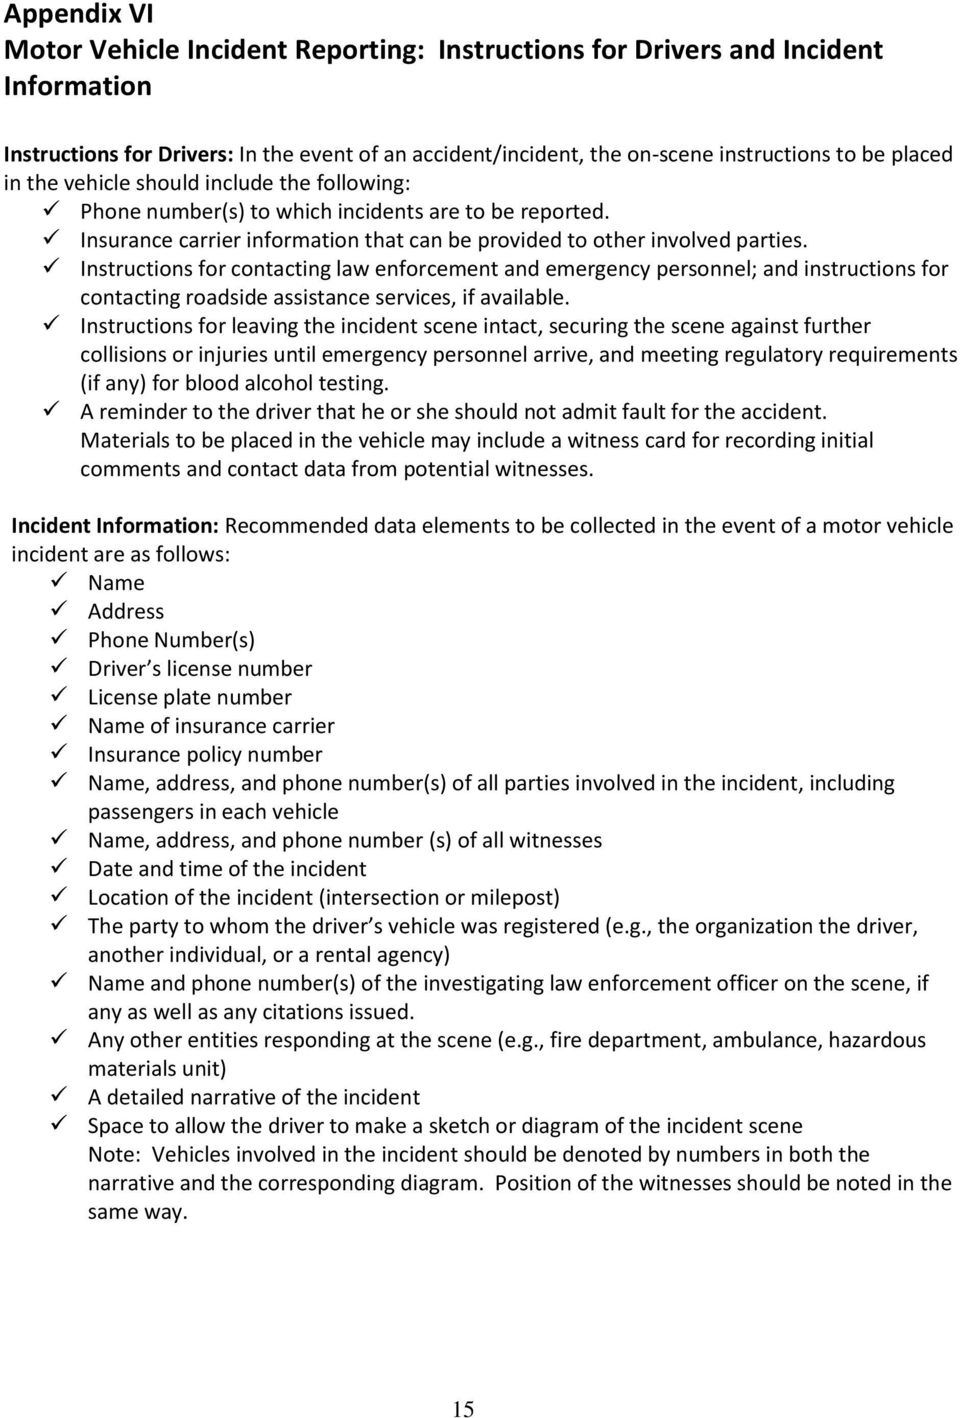 Instructions for contacting law enforcement and emergency personnel; and instructions for contacting roadside assistance services, if available.